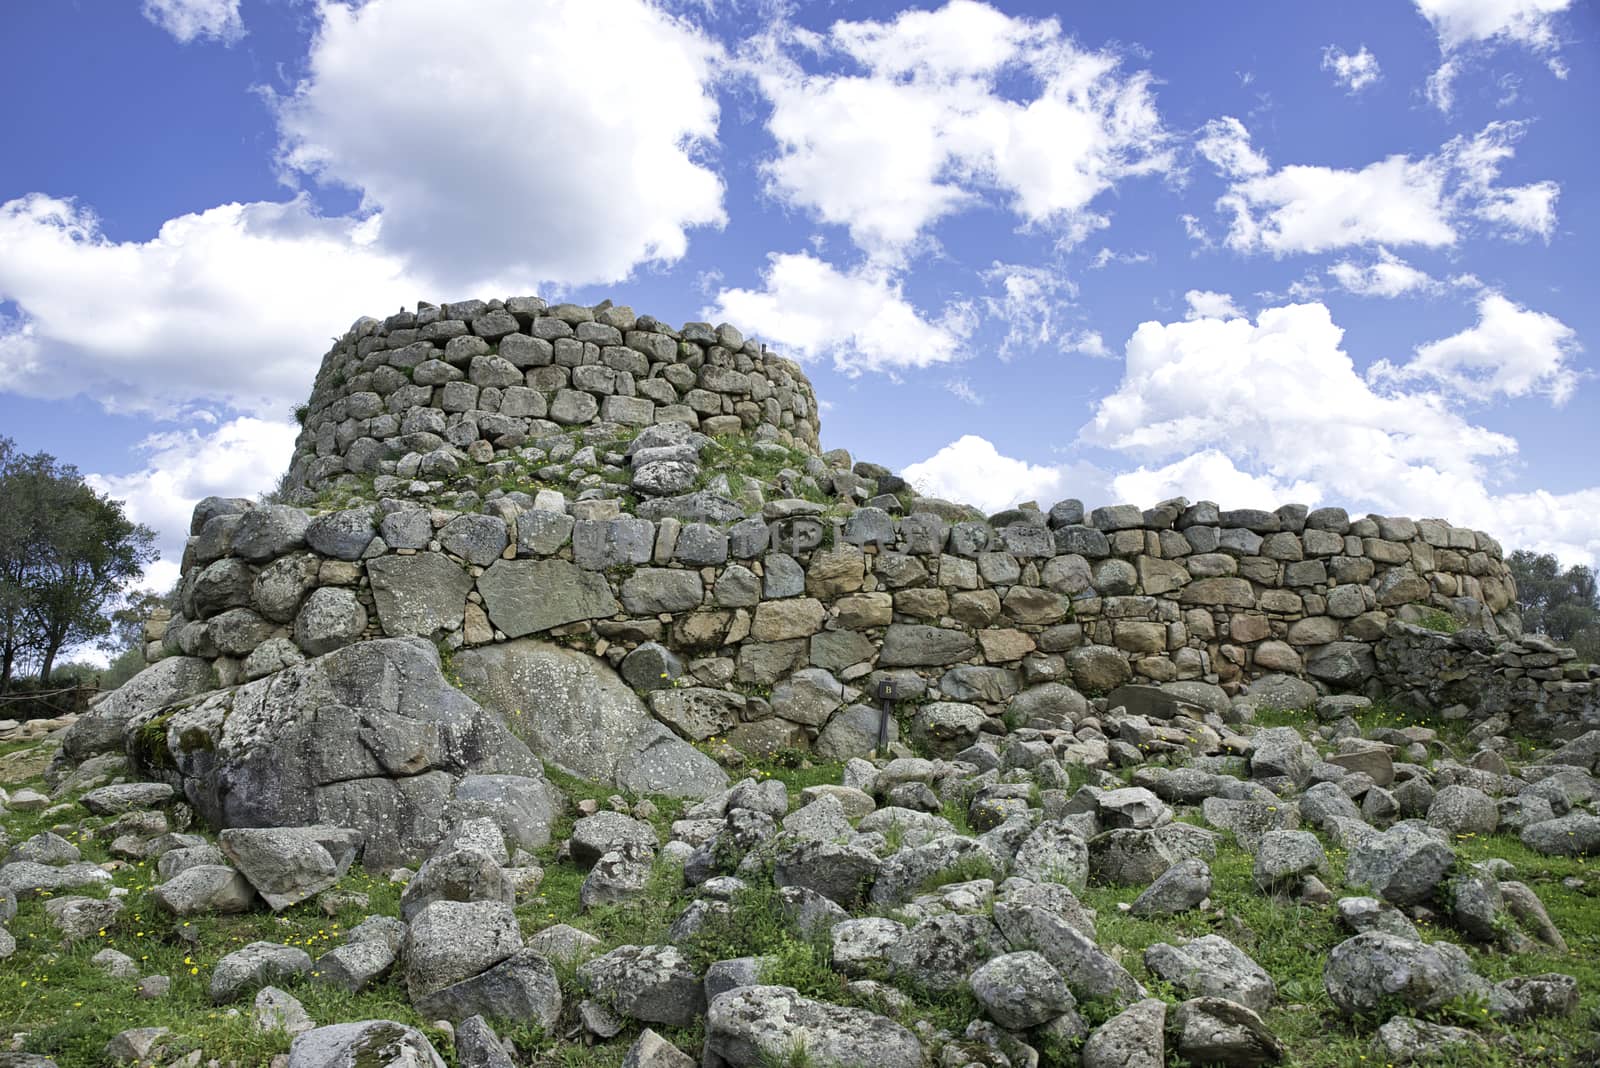 Nuraghe on the island of sardinia Italy,what is known about the Nuragic,is that it was a people of shepherds and farmers into small communities who lived in Sardinia for 8 centuries.